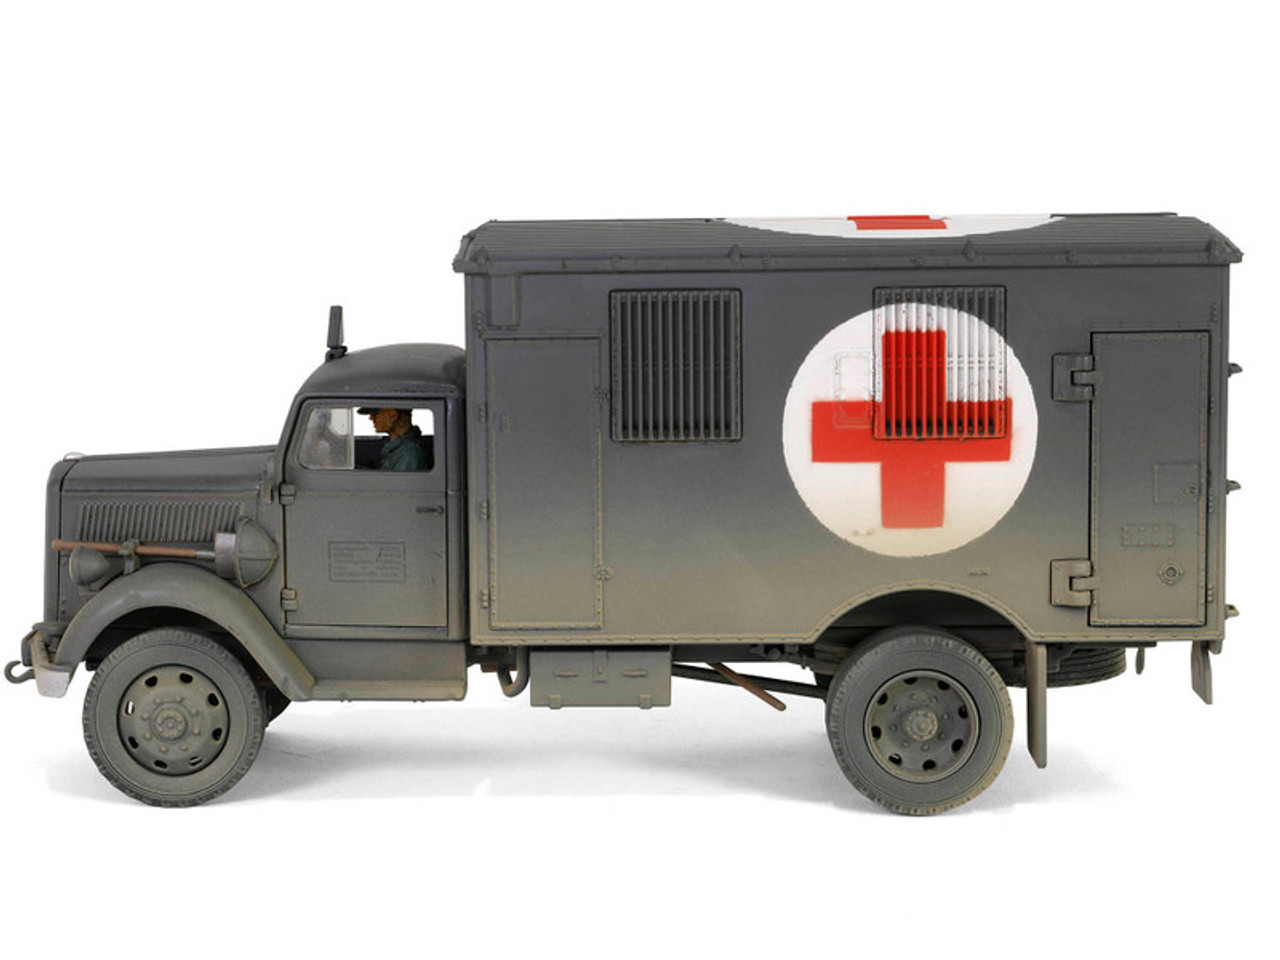 Opel-Blitz Kfz.305 Ambulance Gray (Weathered) "German Army" "Armoured Fighting Vehicle" Series 1/32 Diecast Model by Forces of Valor